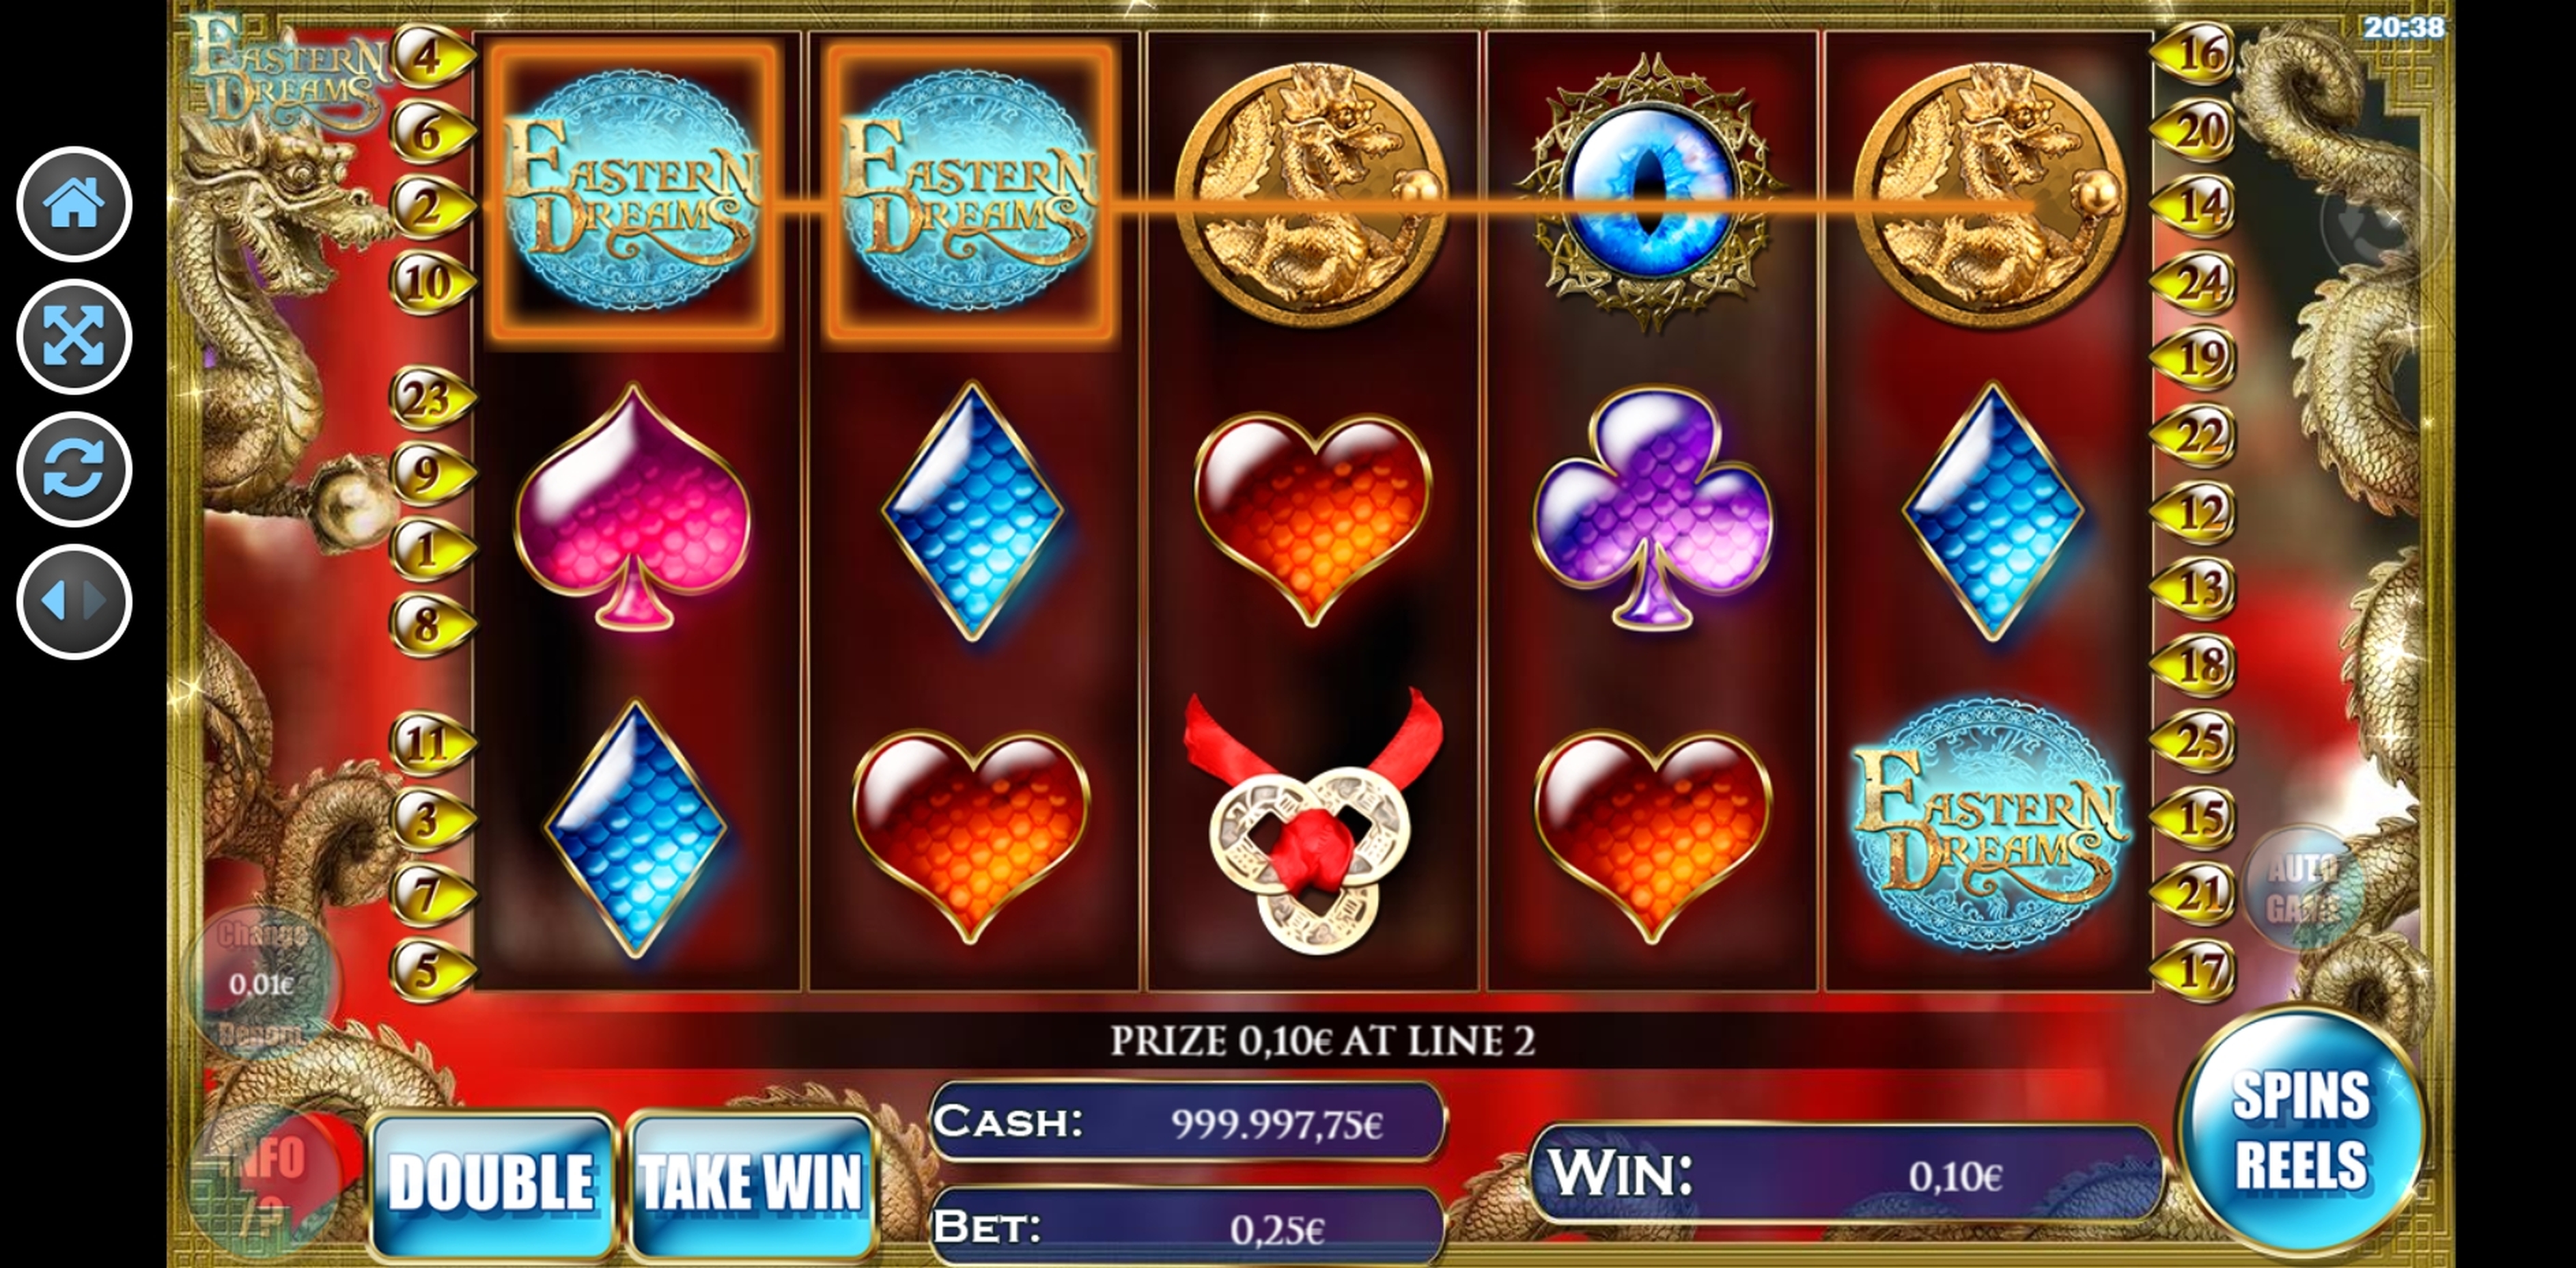 Win Money in Eastern Dreams Free Slot Game by R. Franco